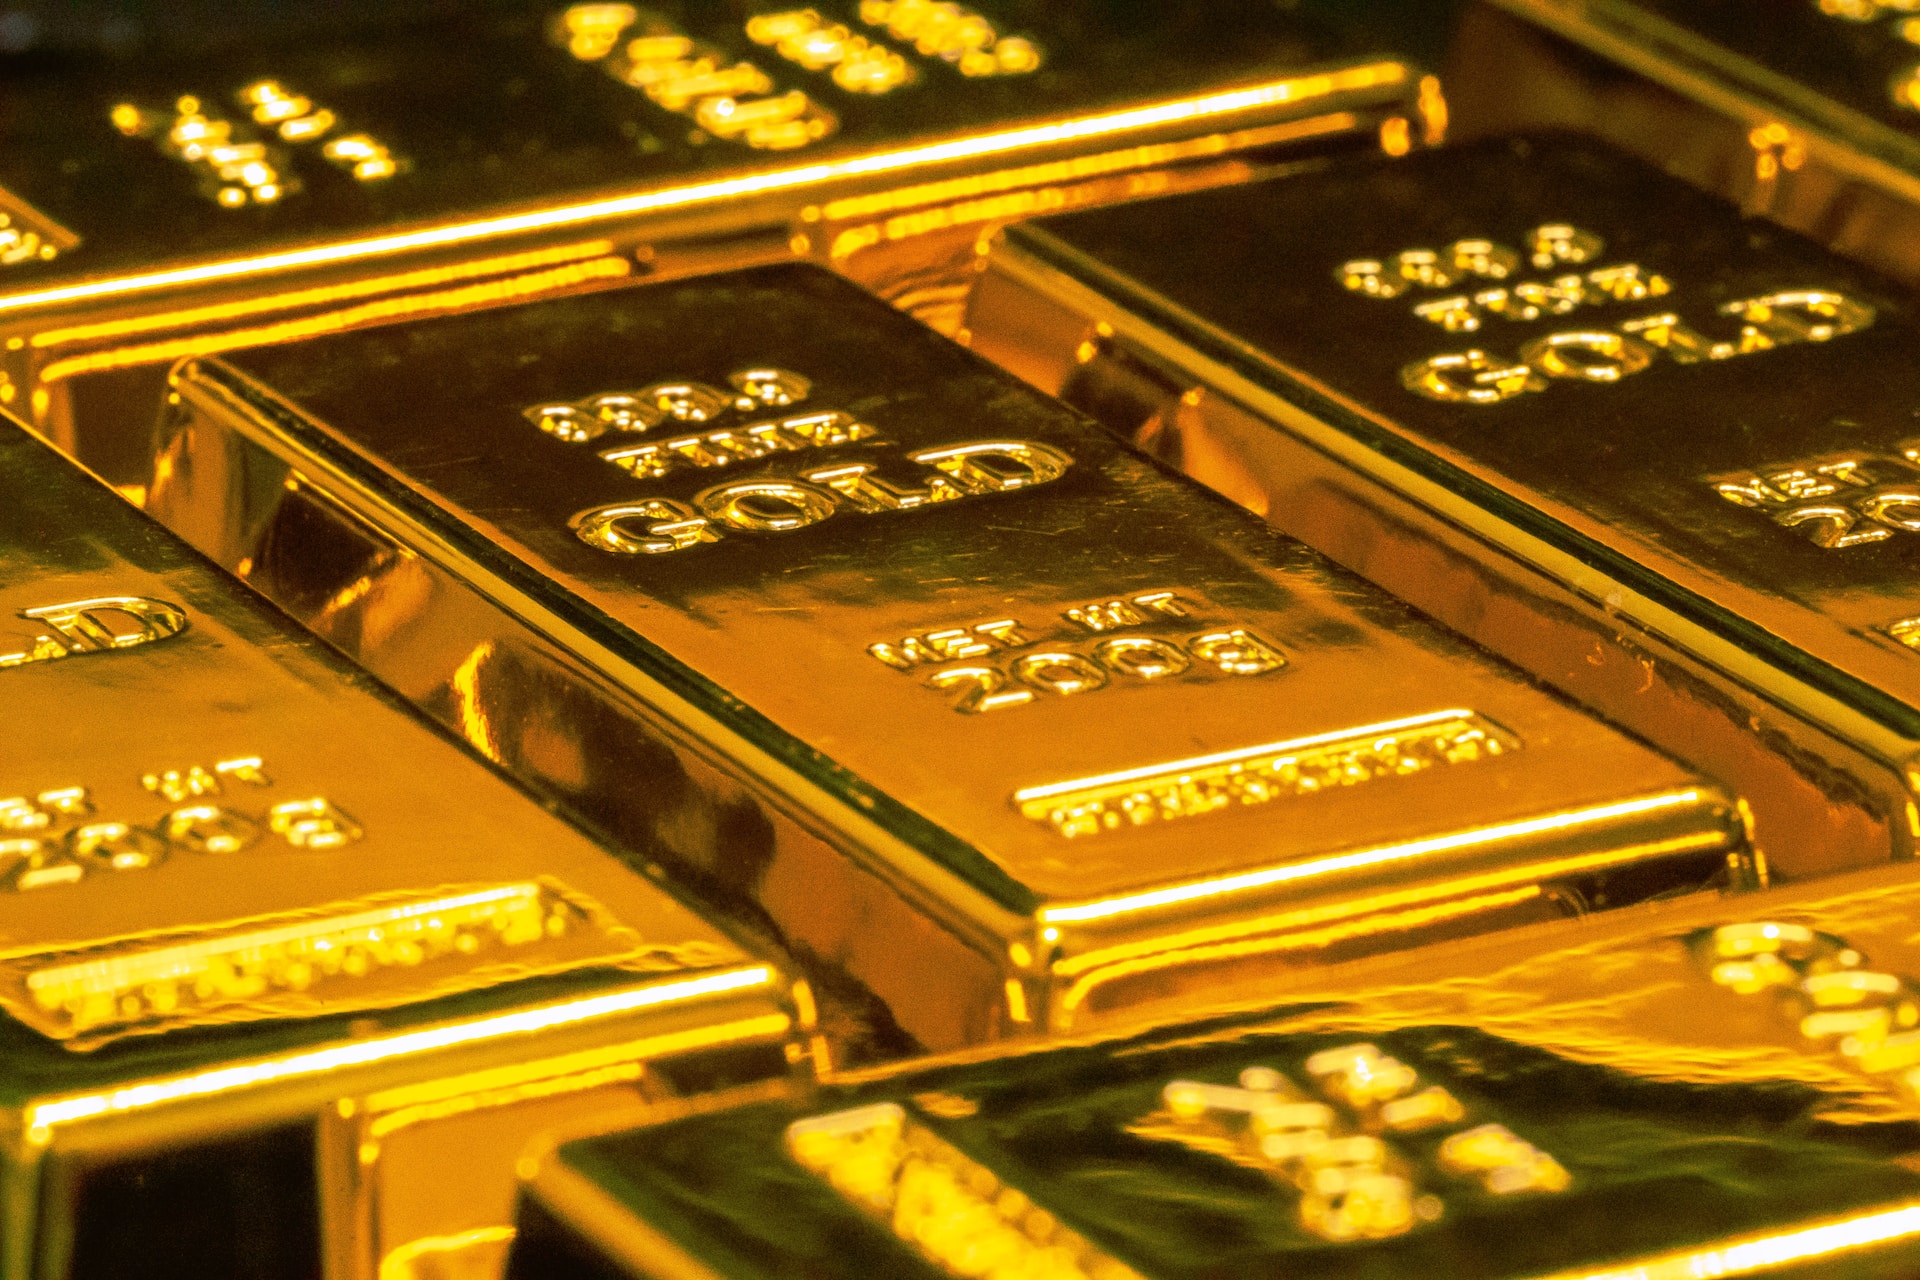 Exclusive Opportunity: Secure 1 Metric Ton of 99% Pure Gold Bars Monthly